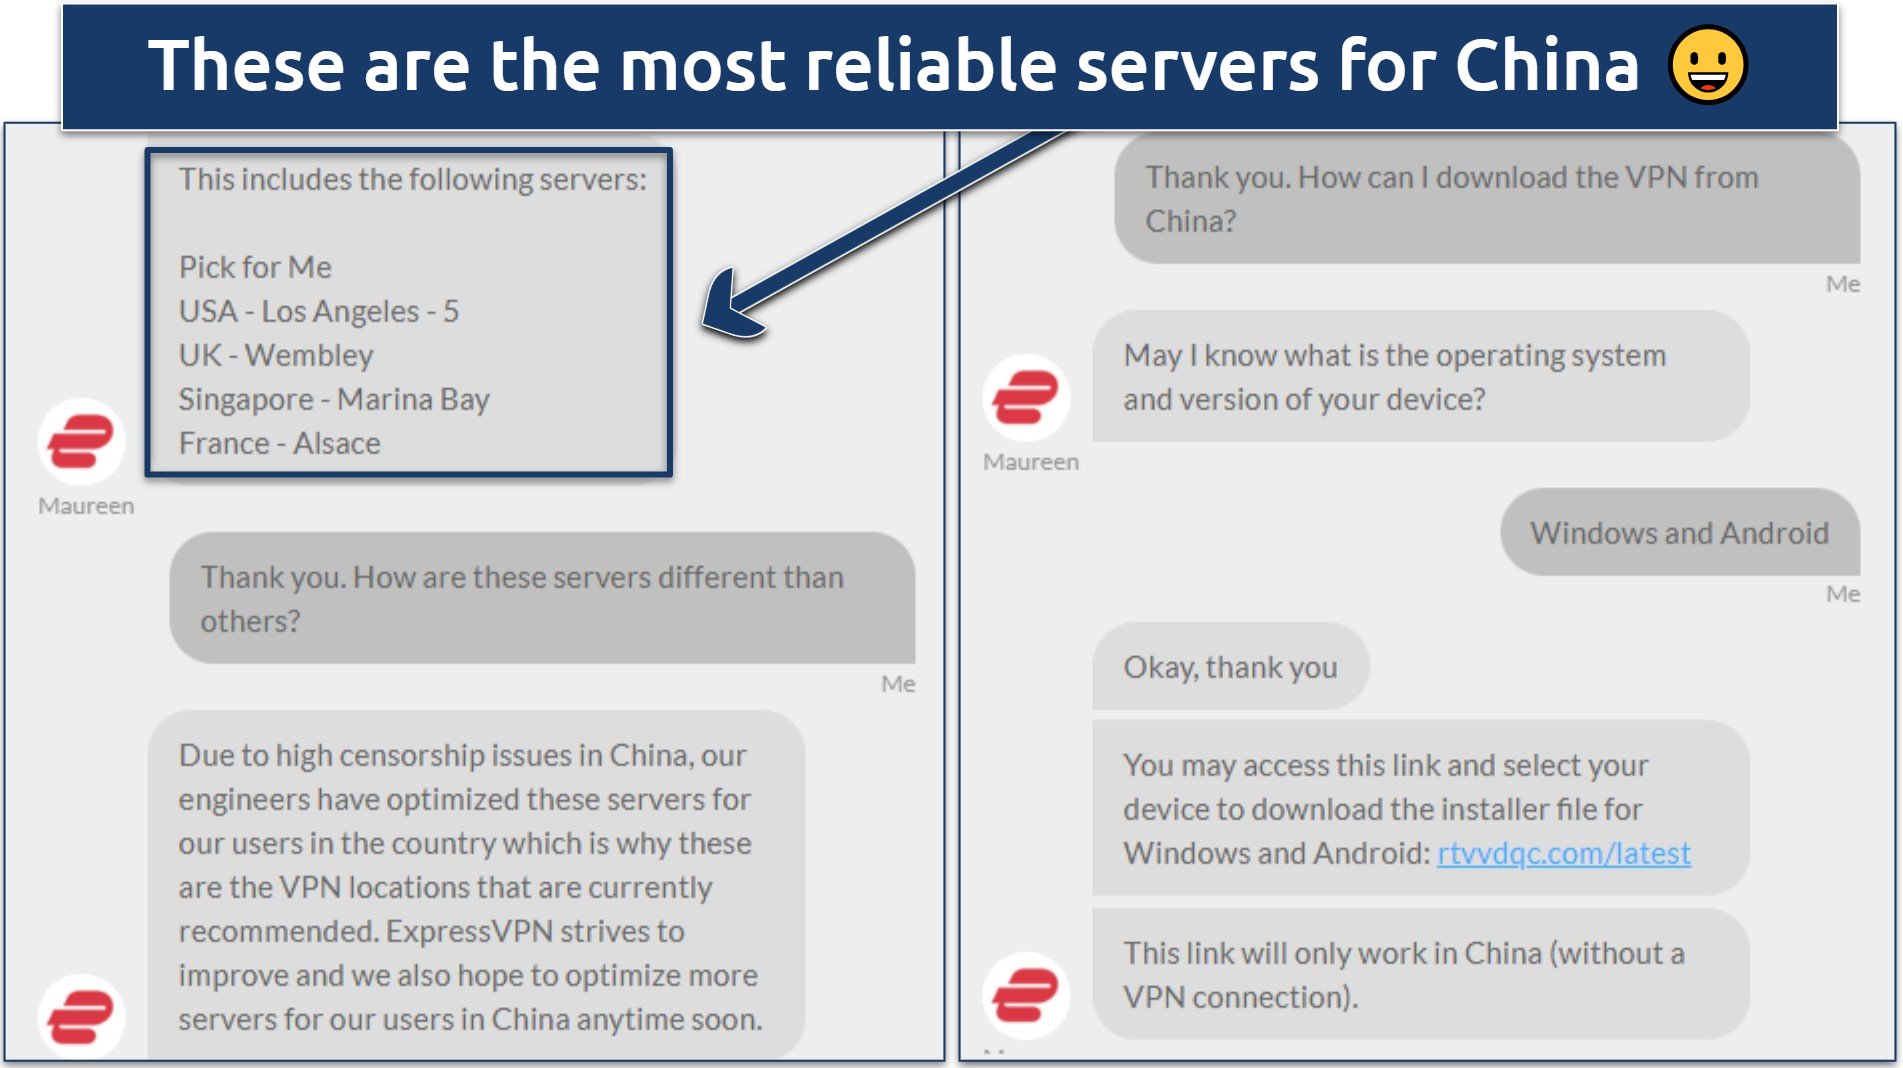 Screenshot showing a conversation with ExpressVPN live char support regarding the VPN use in China